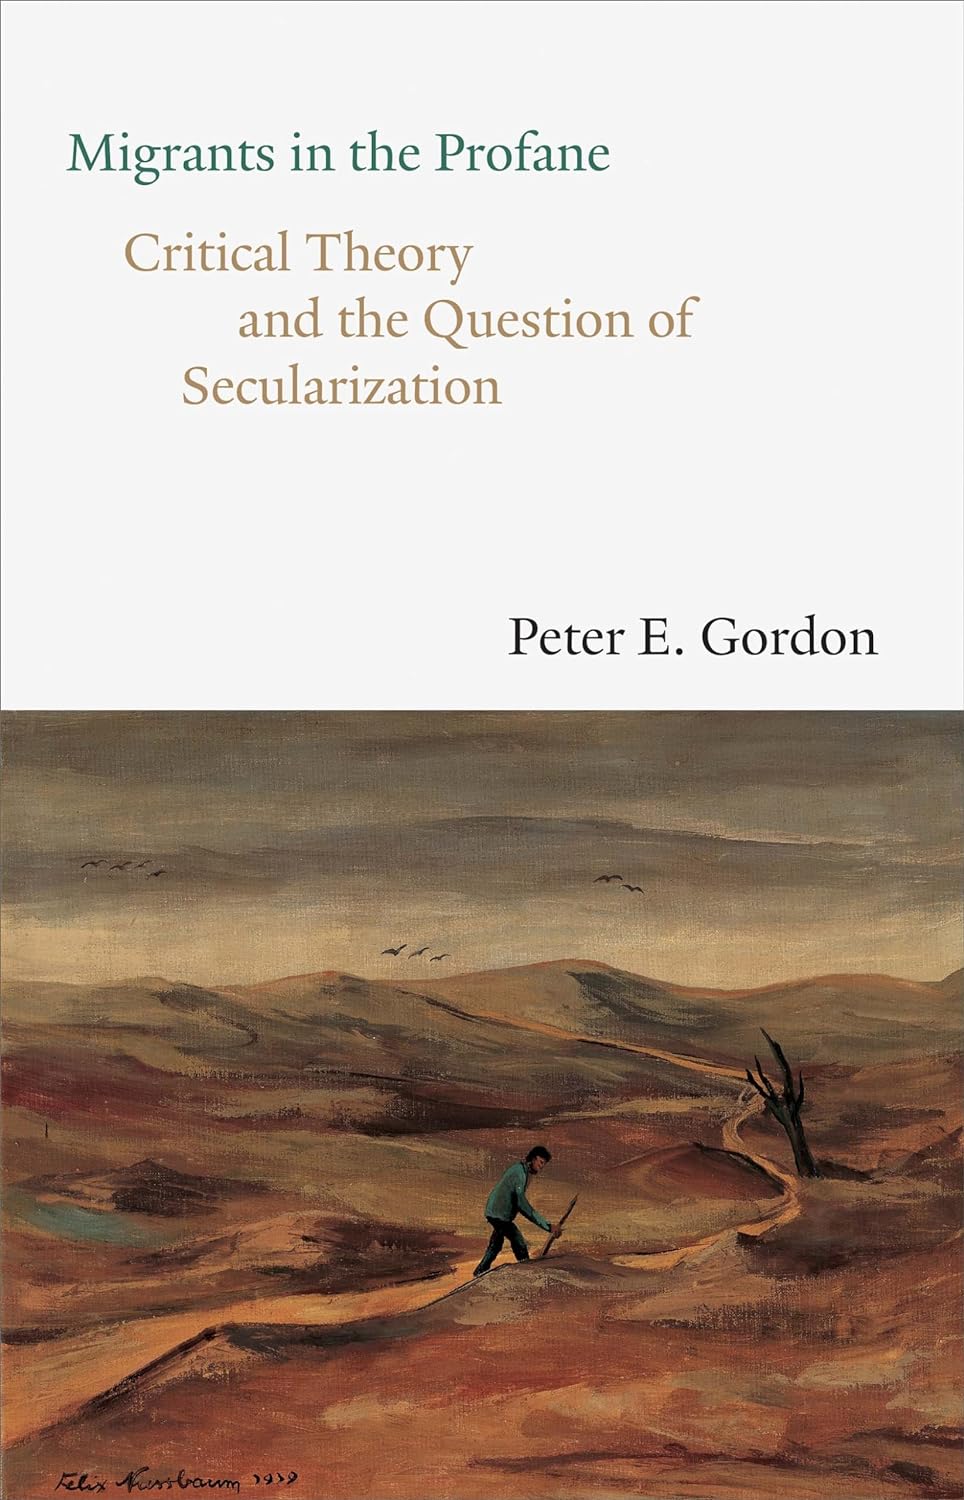 Book cover for "Migrants in the Profane," by Peter E. Gordon